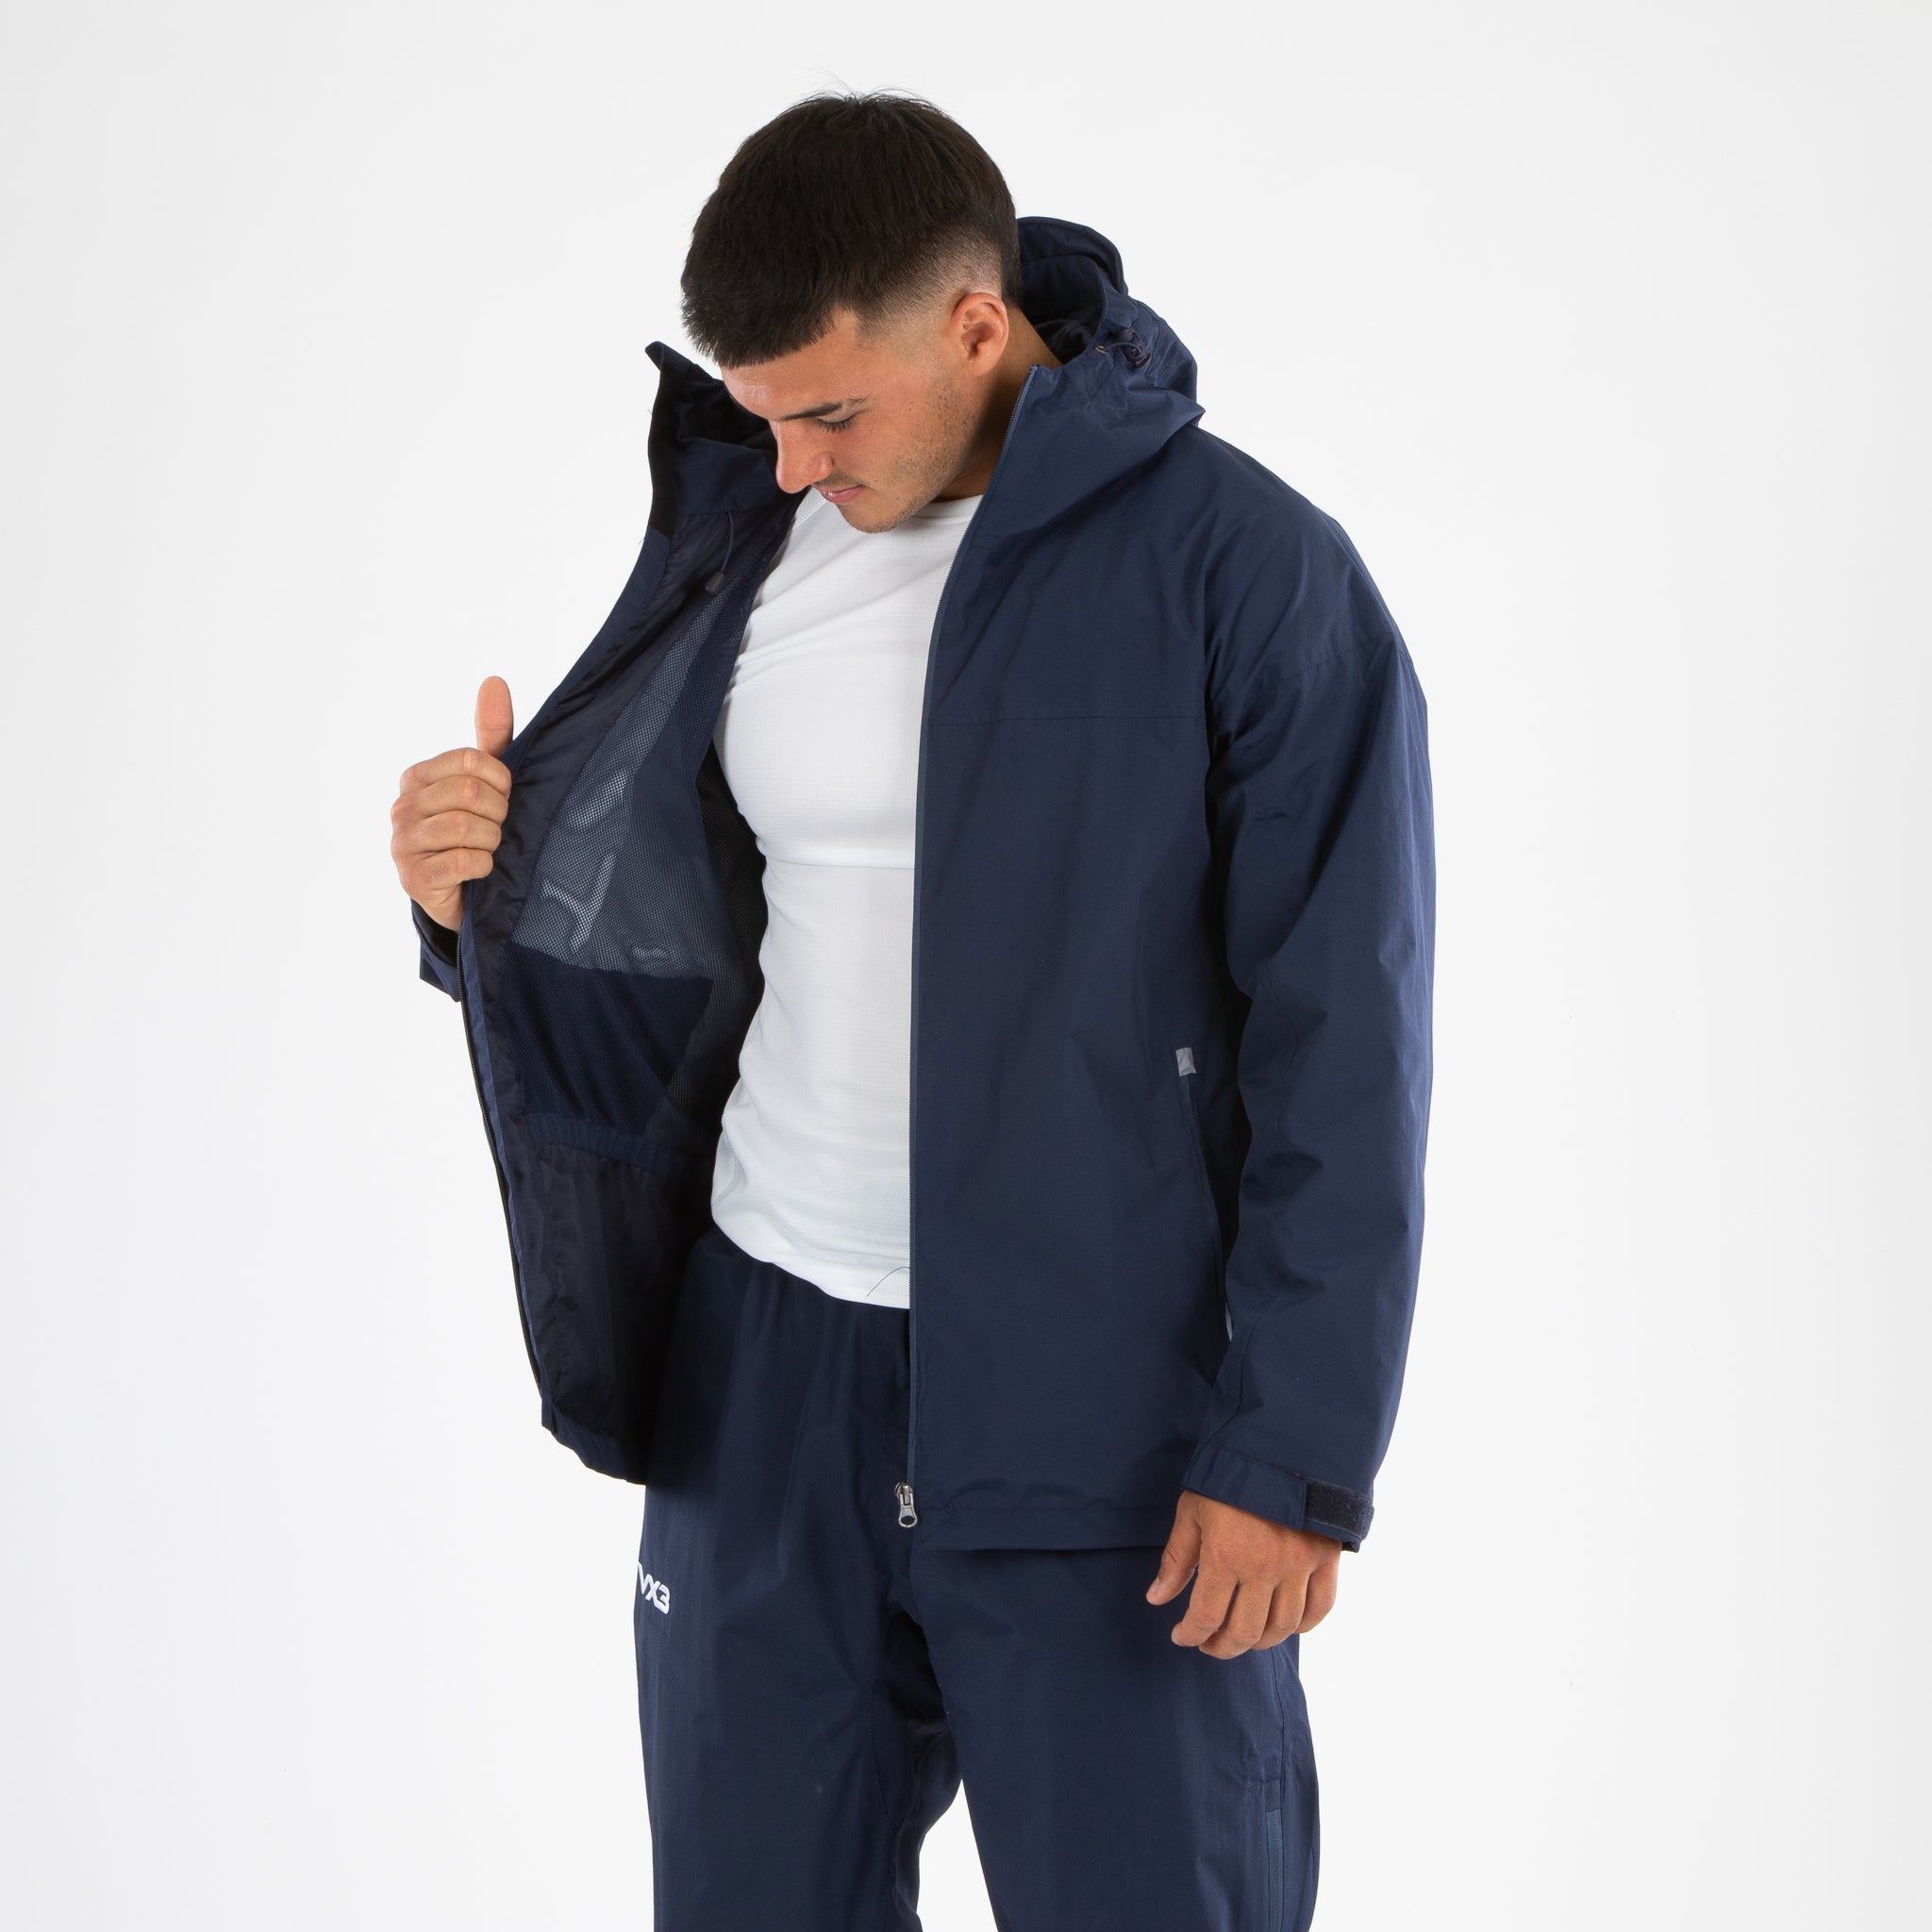 VX3 Protego Waterproof Jacket Navy Front View